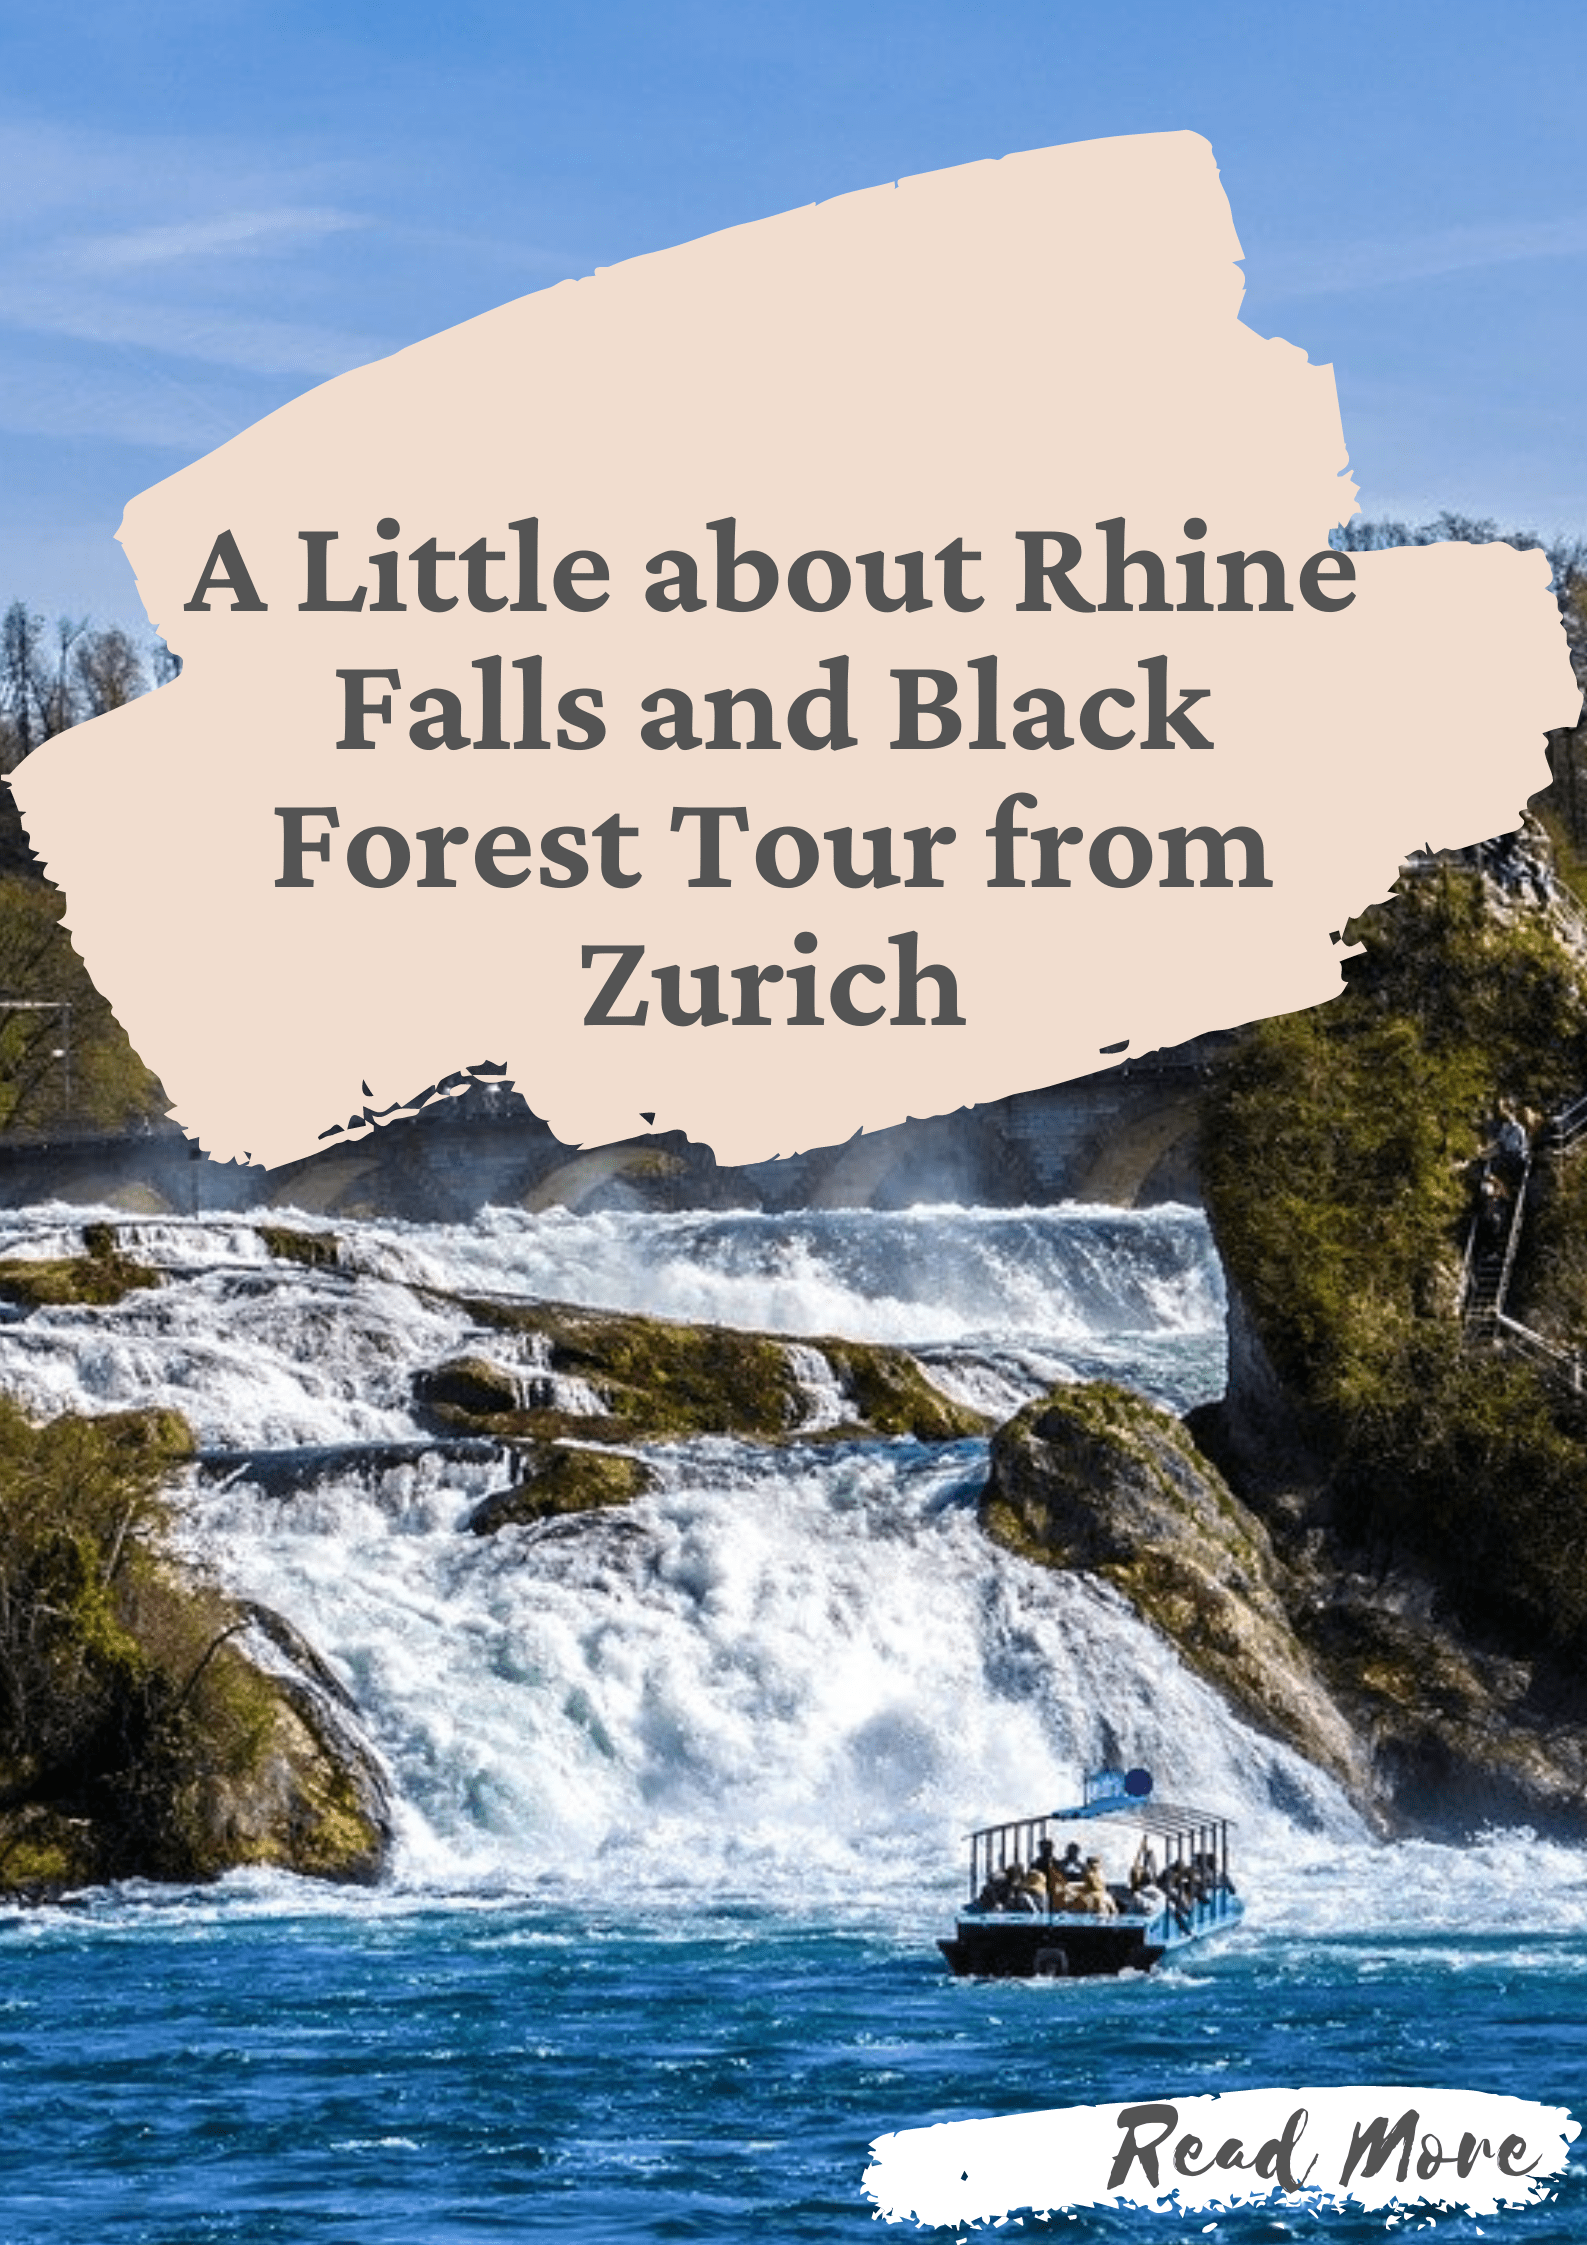 A Little about Rhine Falls and Black Forest Tour from Zurich